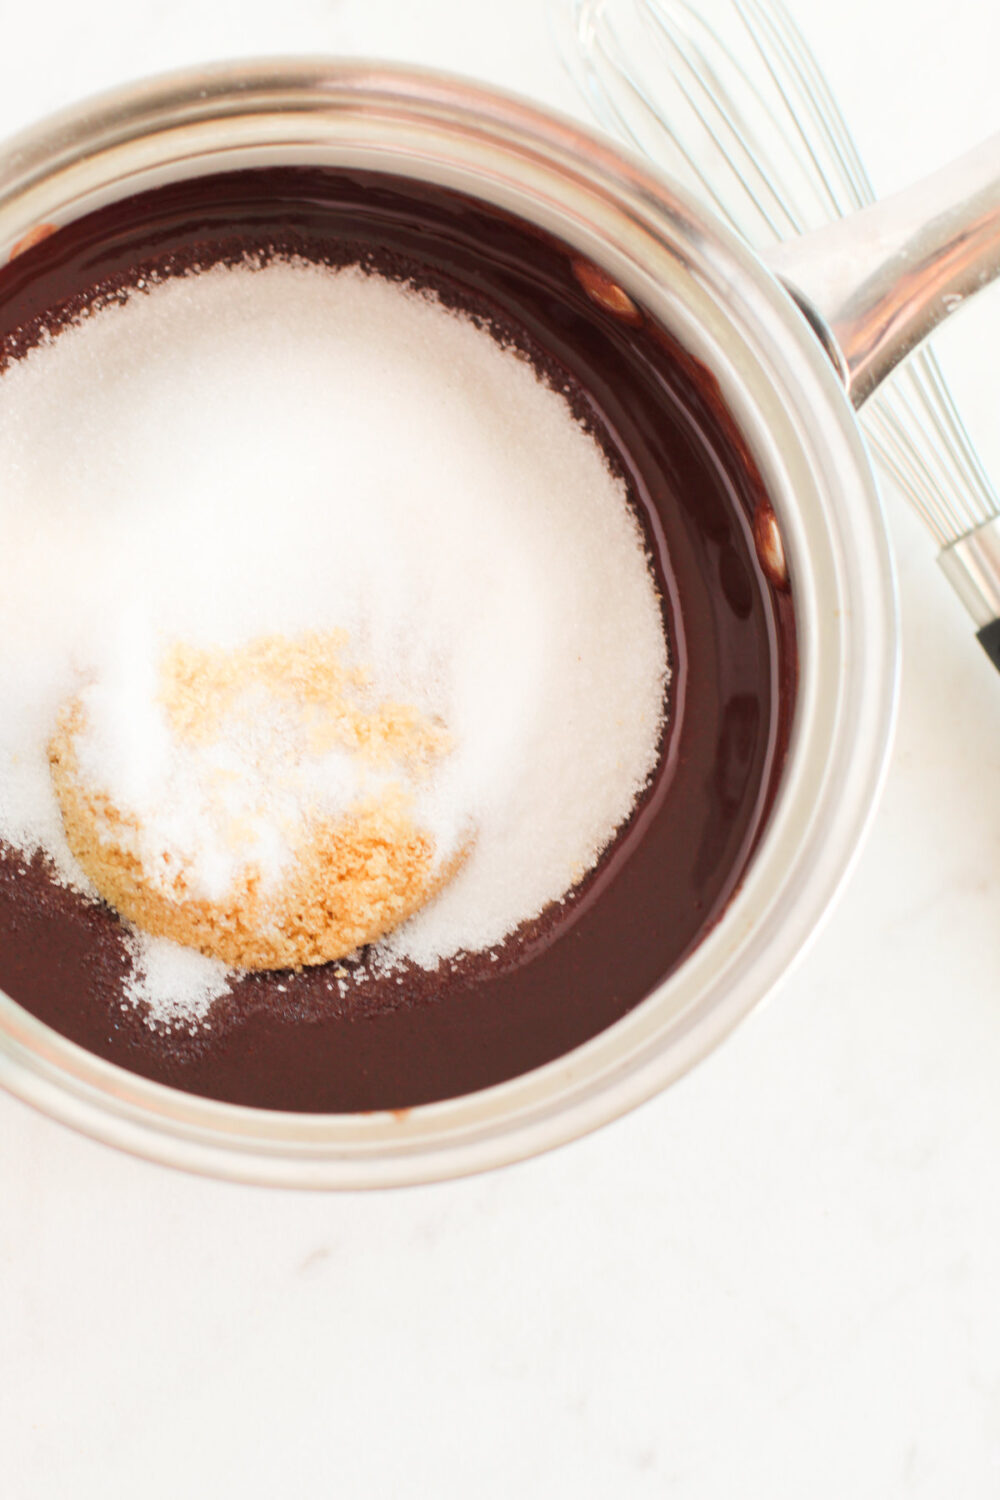 Sugar and chocolate in a pan.